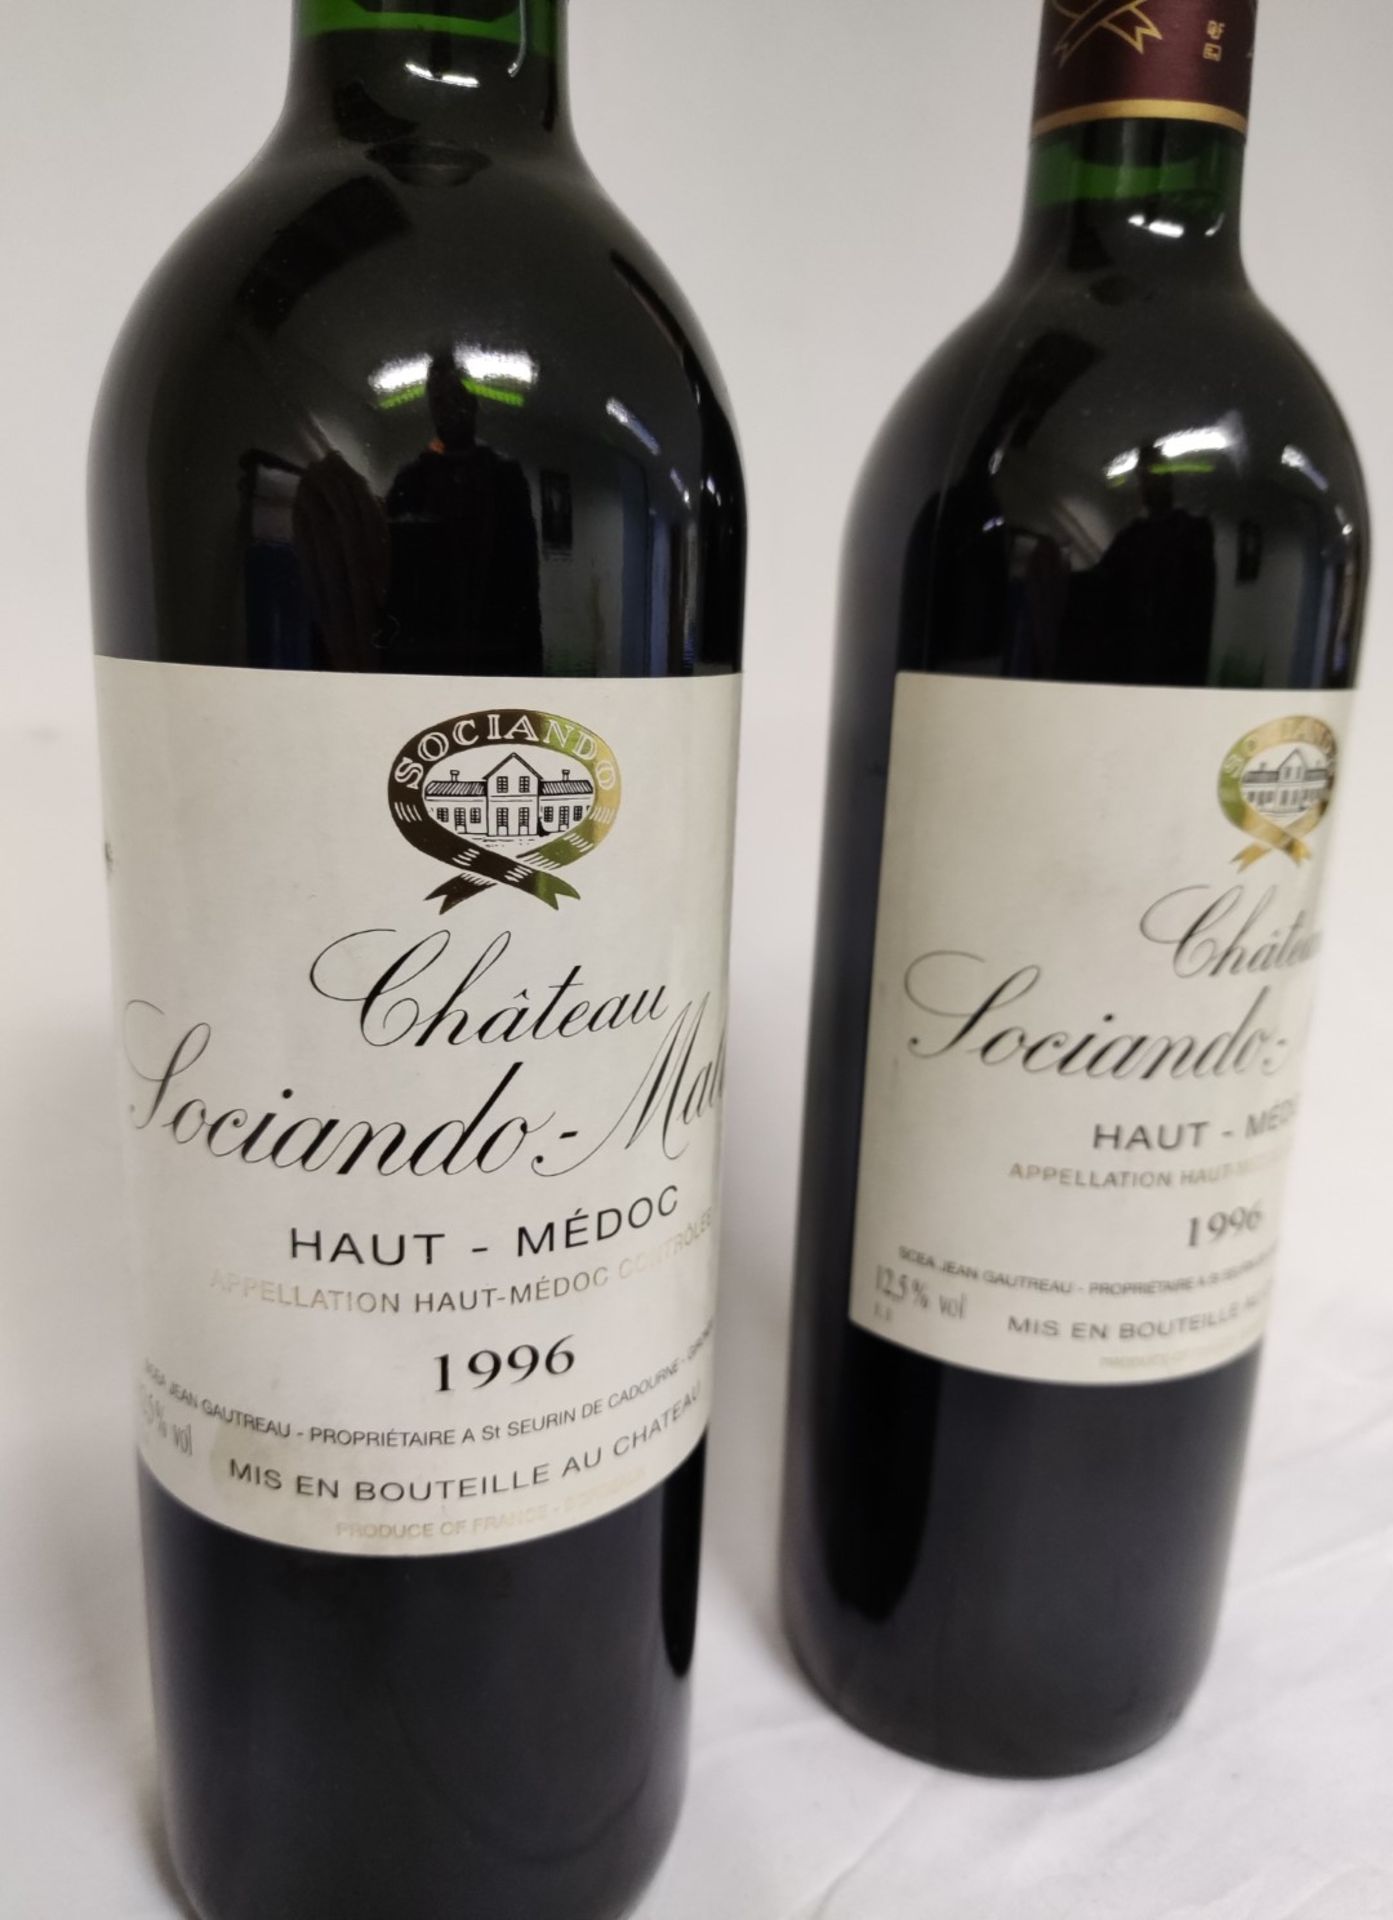 2 x Bottles of 1996 Chateau Sociando-Mallet, Haut-Medoc, France - Dry Red Wine - RRP £260 - Image 2 of 7